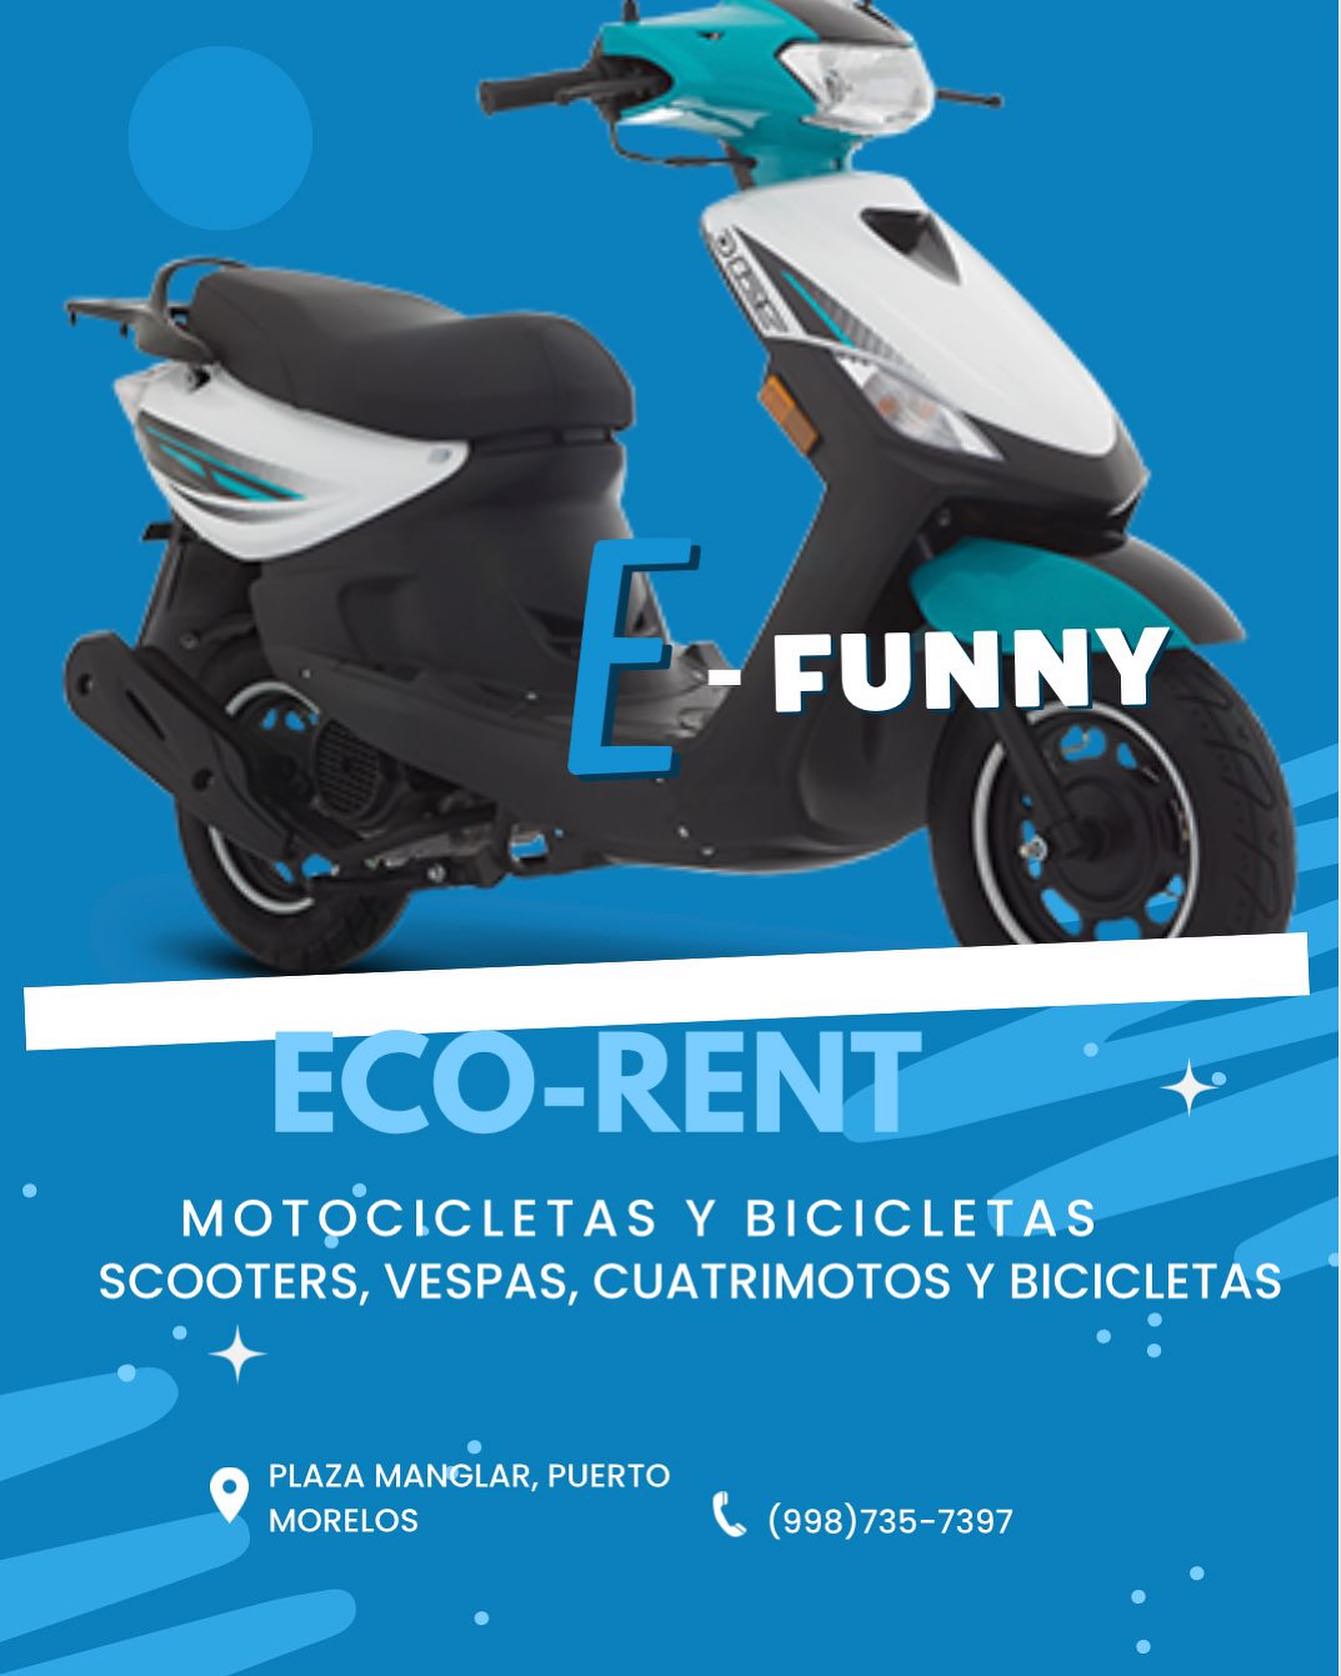 E-Funny rents scooters, bikes, and ATVs.